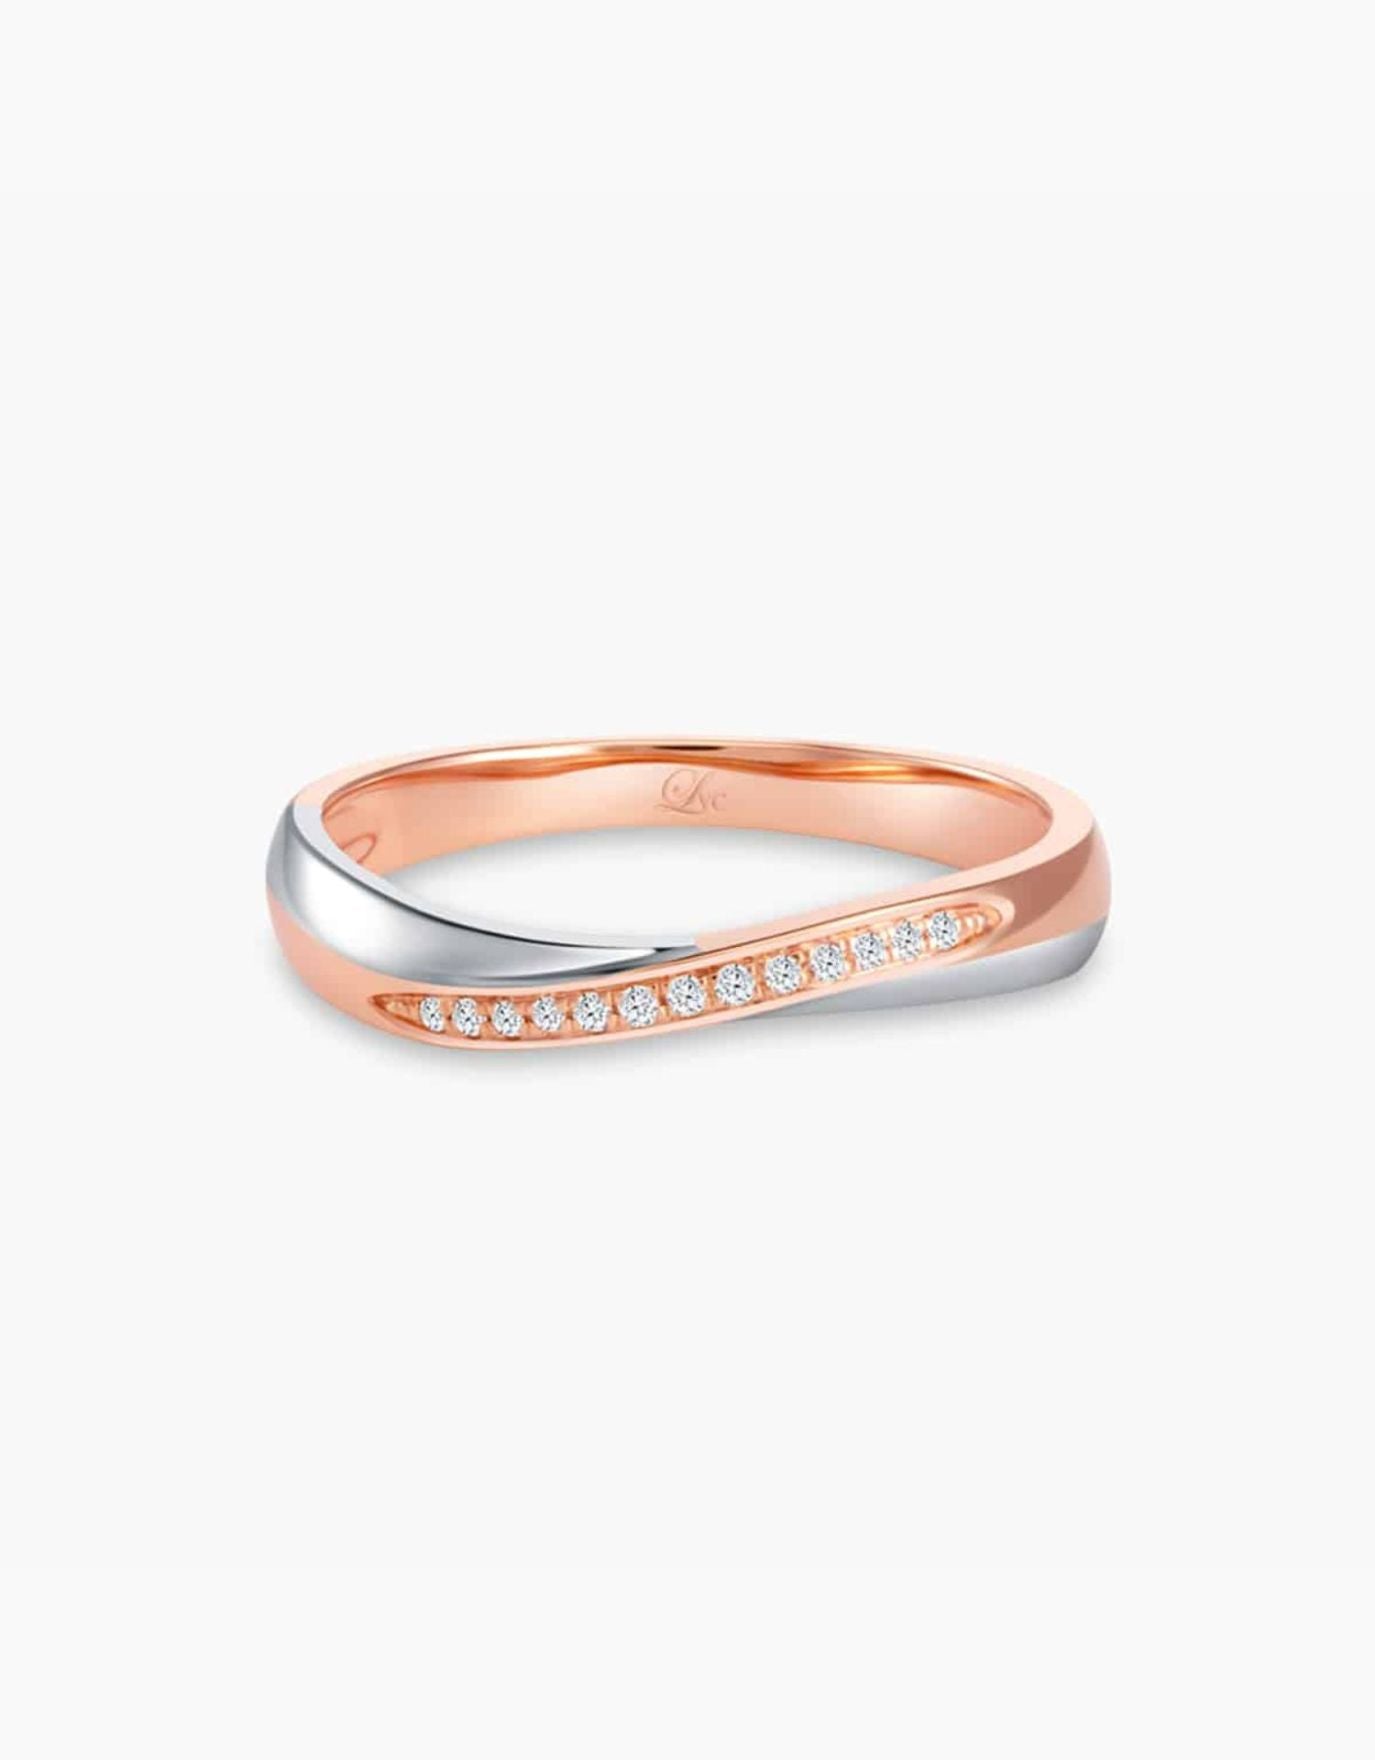 LVC Perfection Bliss Wedding Band in White and Rose Gold with Diamonds